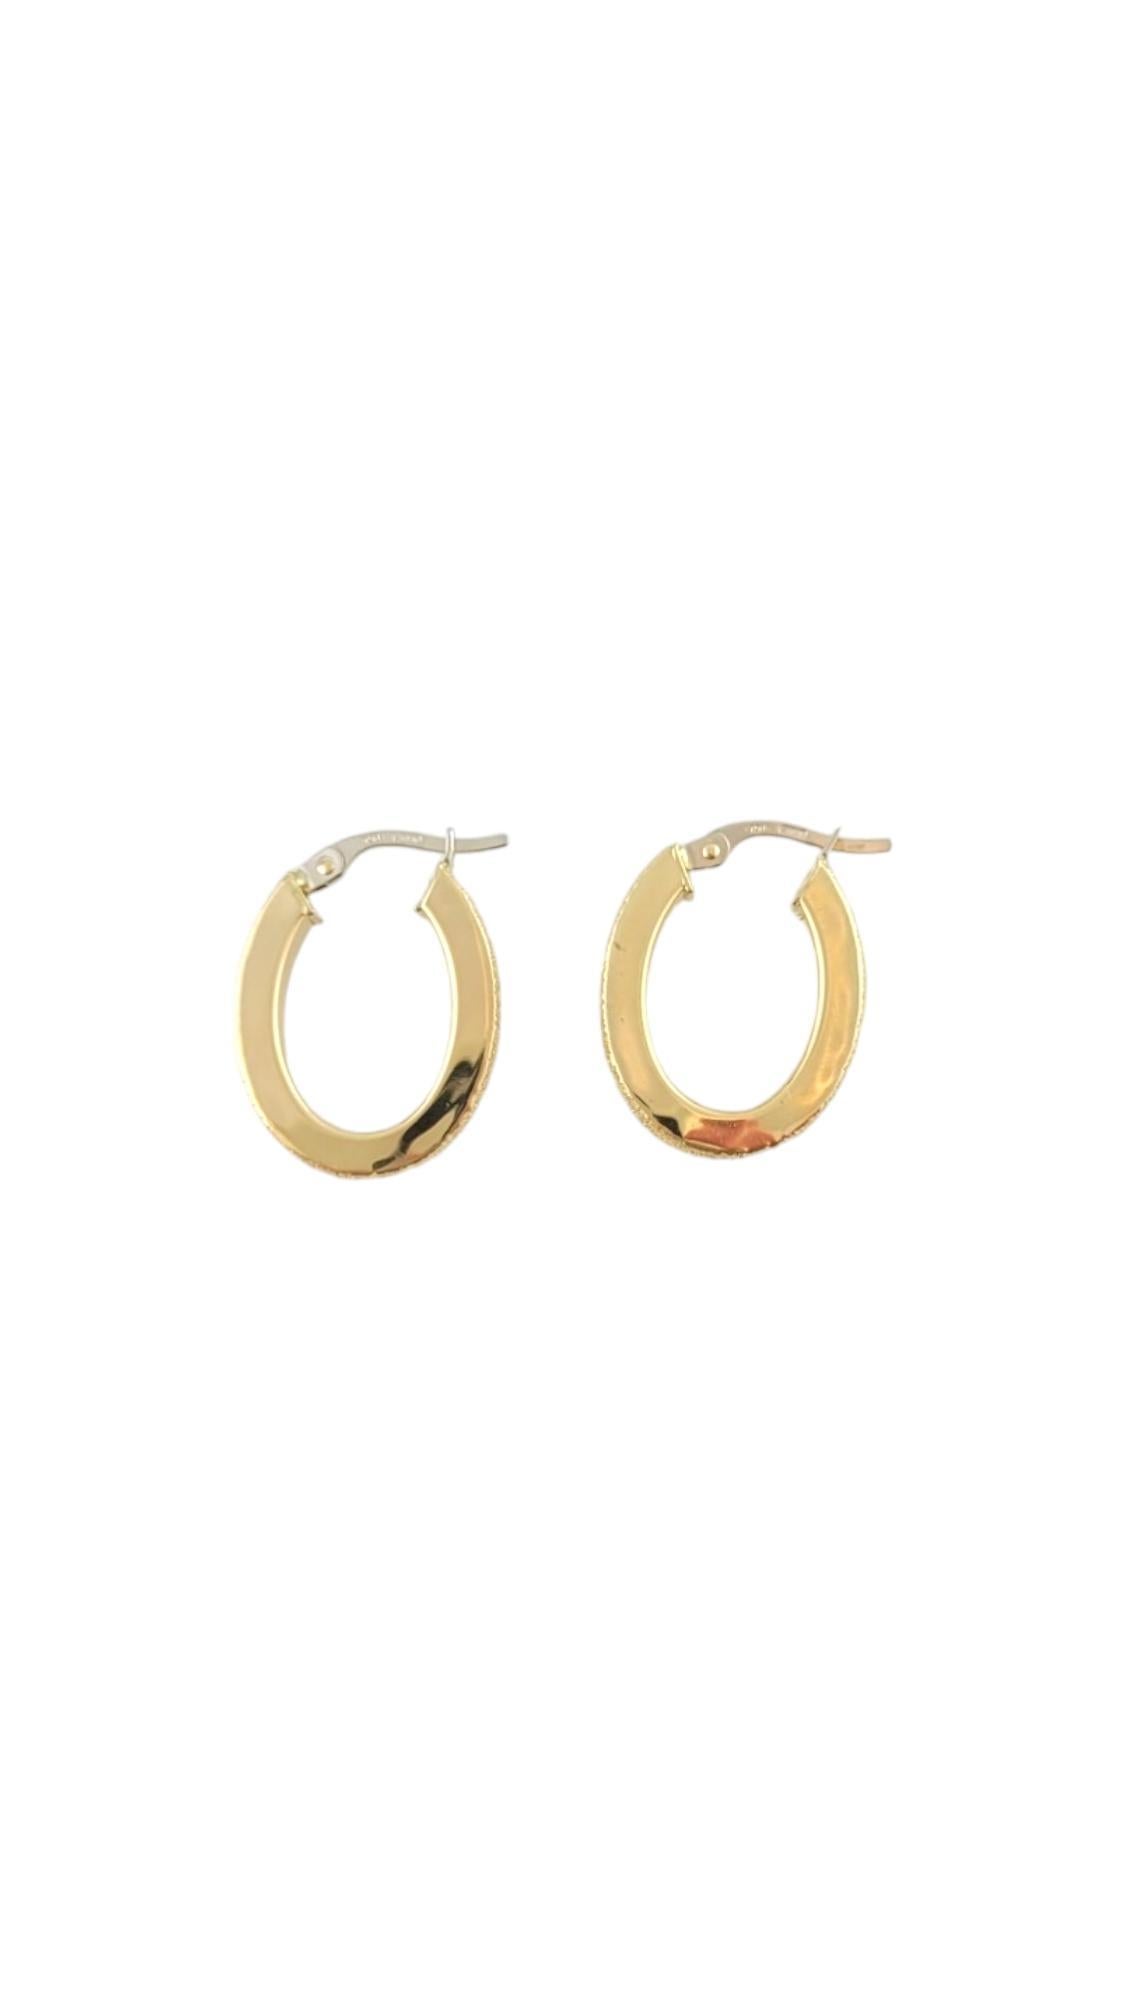 Vintage 18 Karat Yellow and White Gold Hoop Earrings-

These gorgeous gold hoops feature a sparkling textured edge set in yellow gold with white gold clasps. 

Size: 22.4 mm x 3.2 mm x 3.3 mm. 

Stamped: 750 539 AR

Weight: 2.3 dwt./ 3.6 gr. 

Very